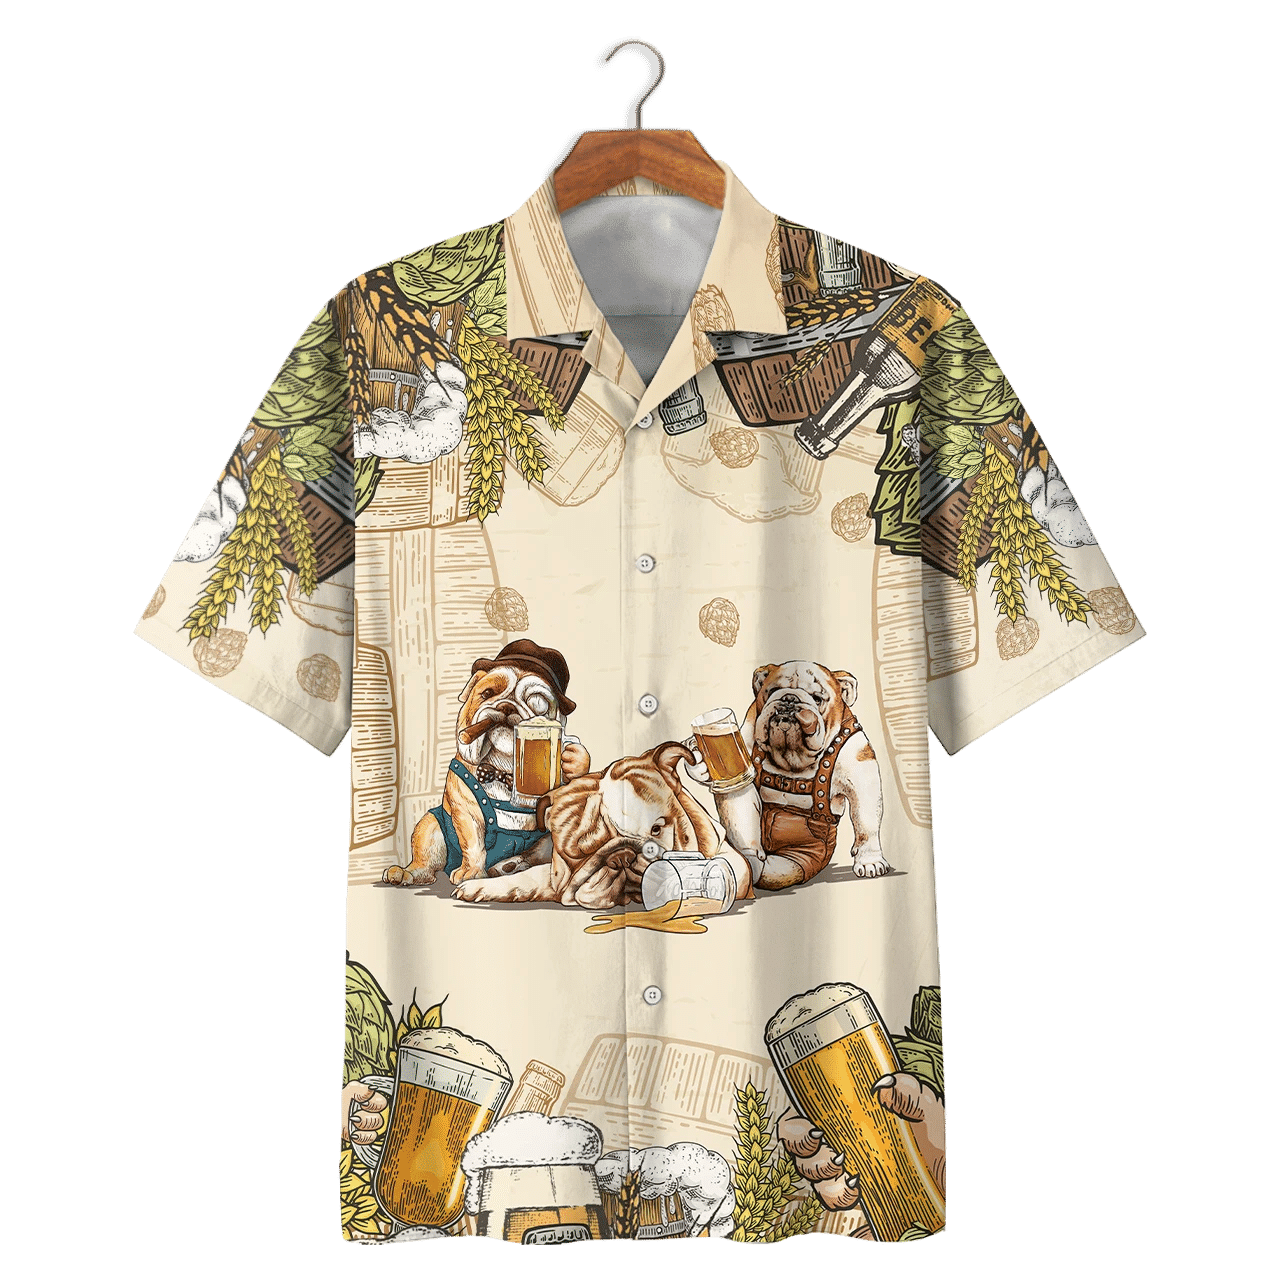 Choose from the many styles and colors to find your favorite Hawaiian Shirt below 122